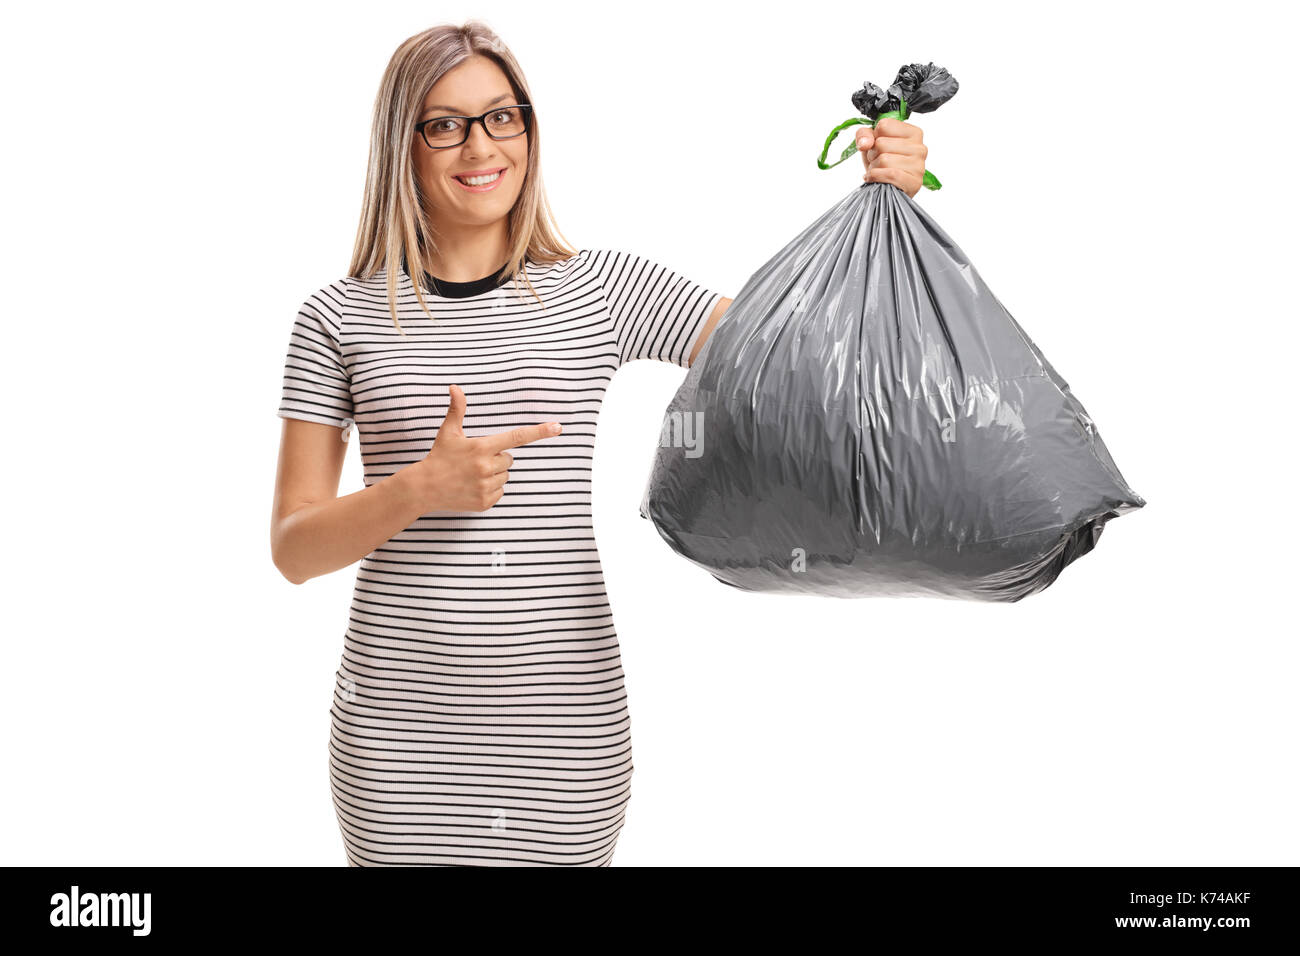 Trash Bag Isolated On A White Background Stock Photo - Download